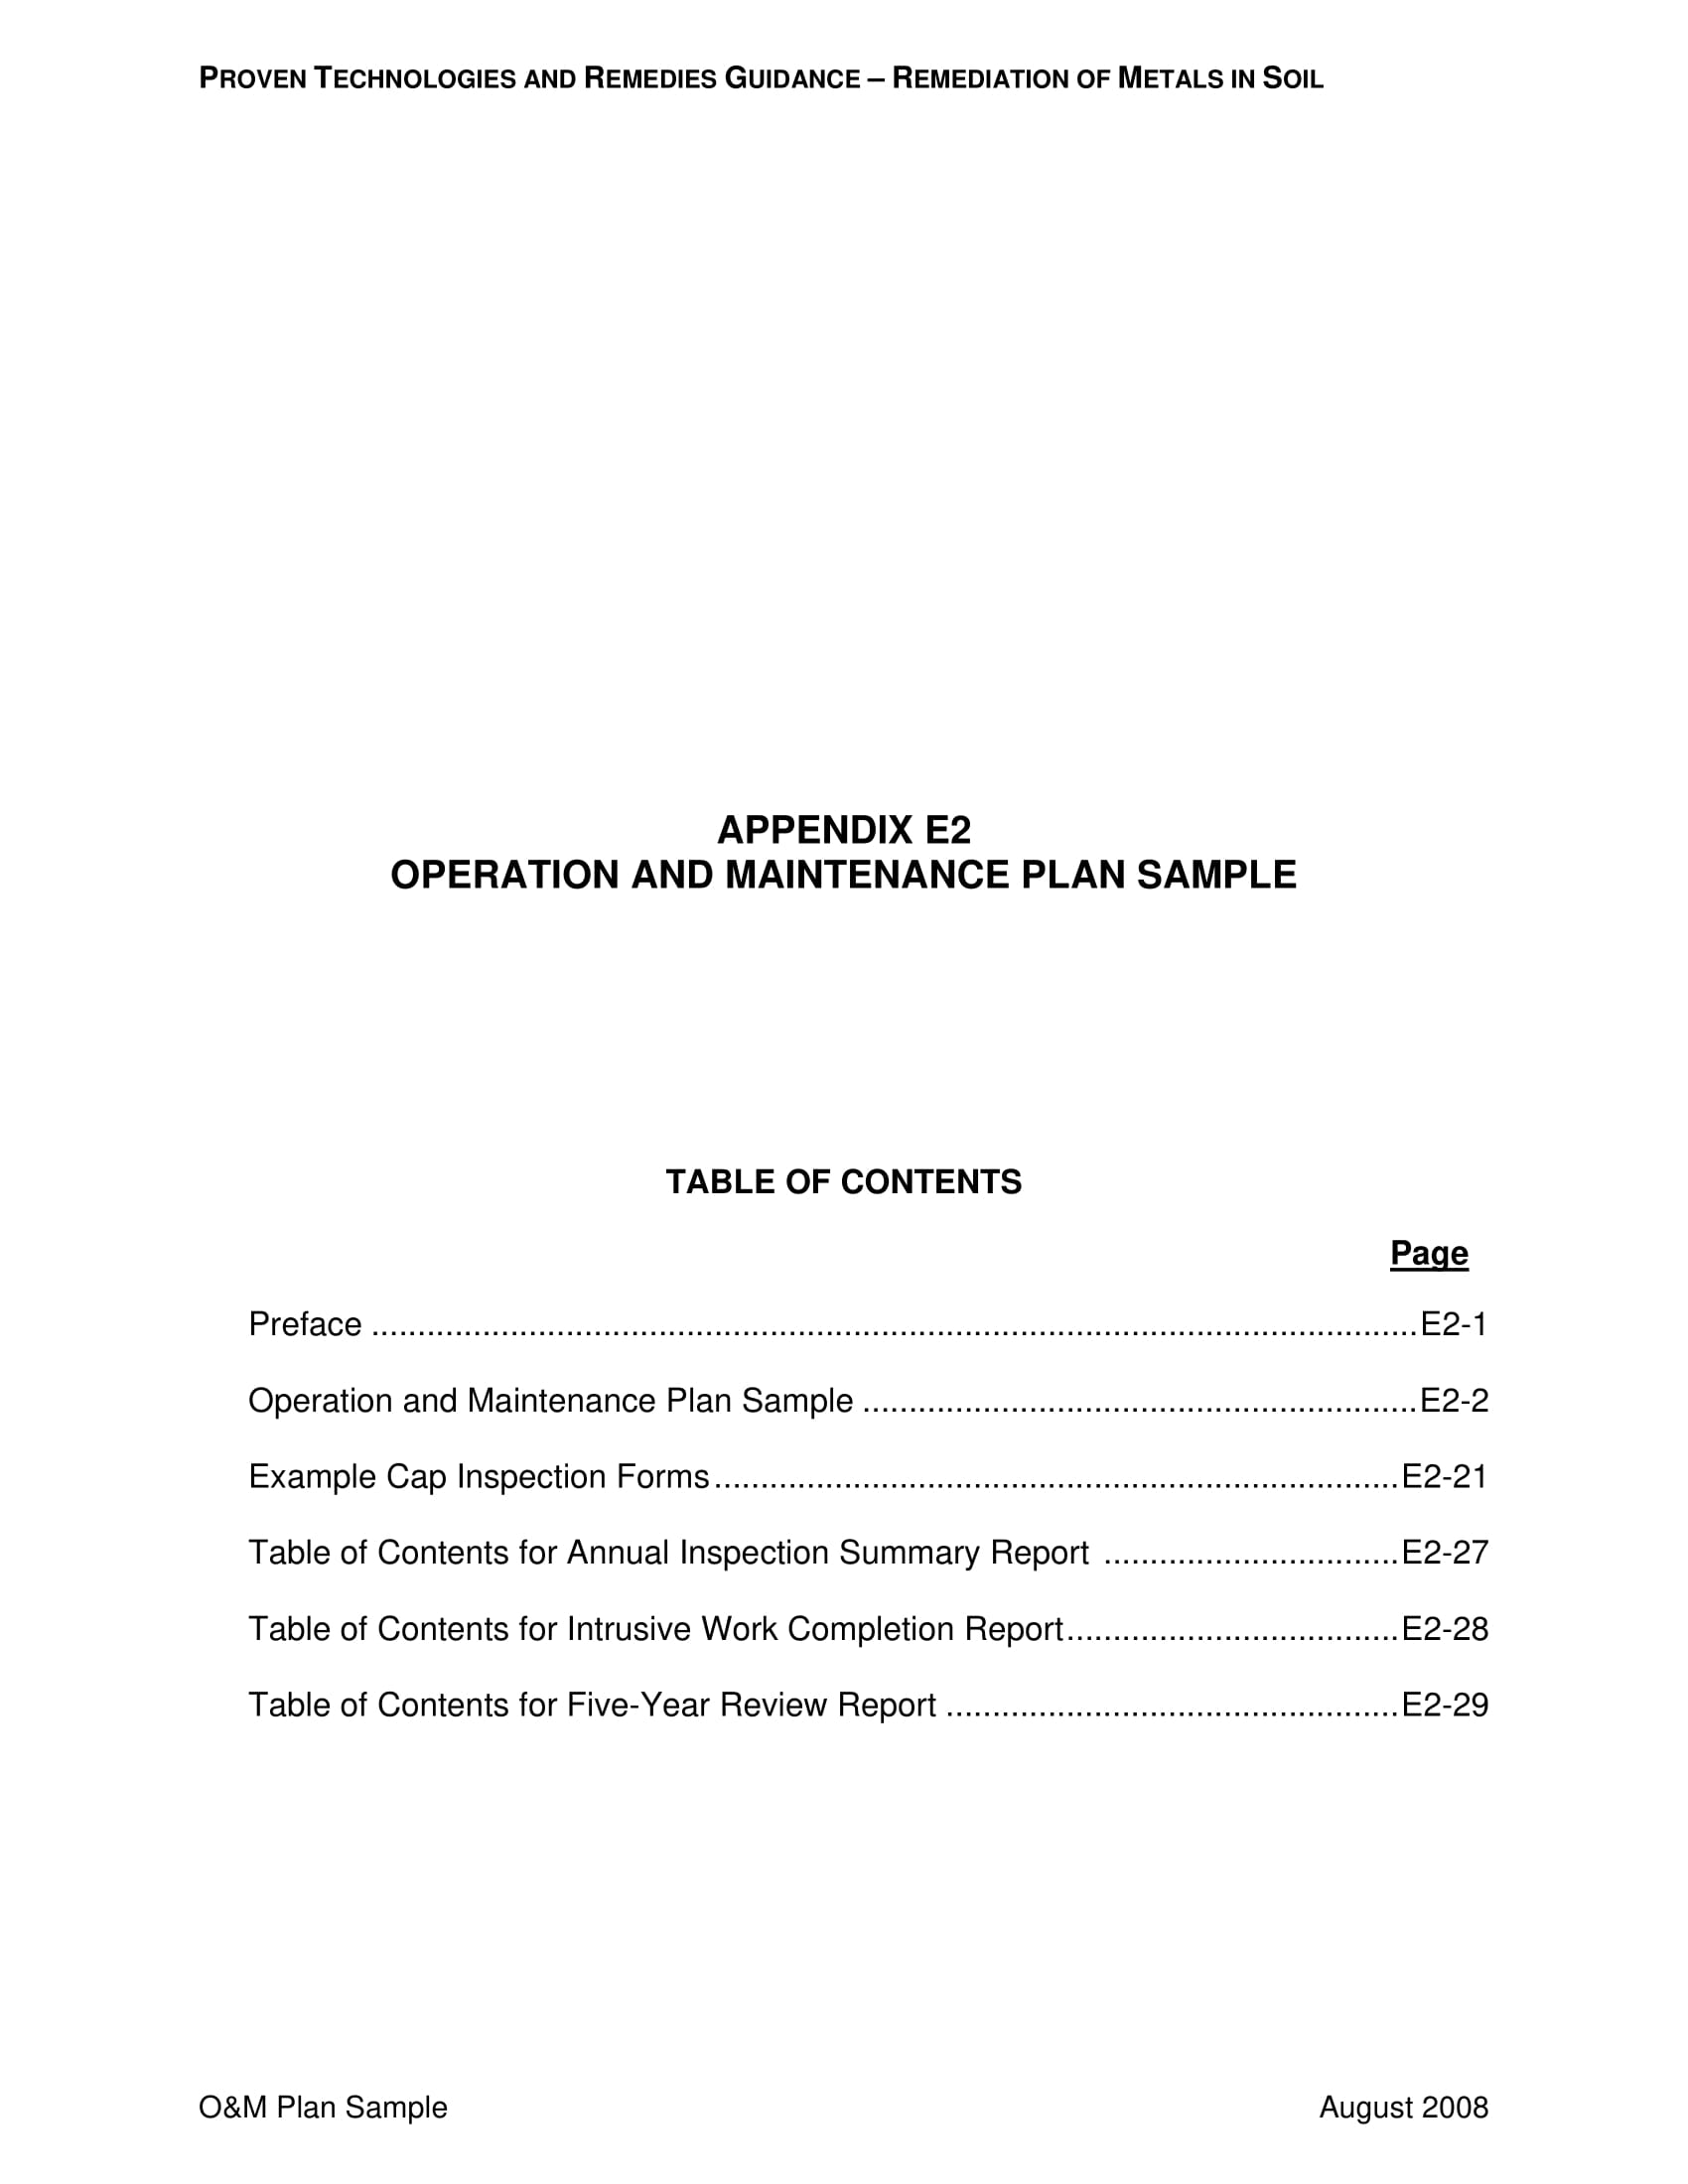 operation and maintenance plan document example 01